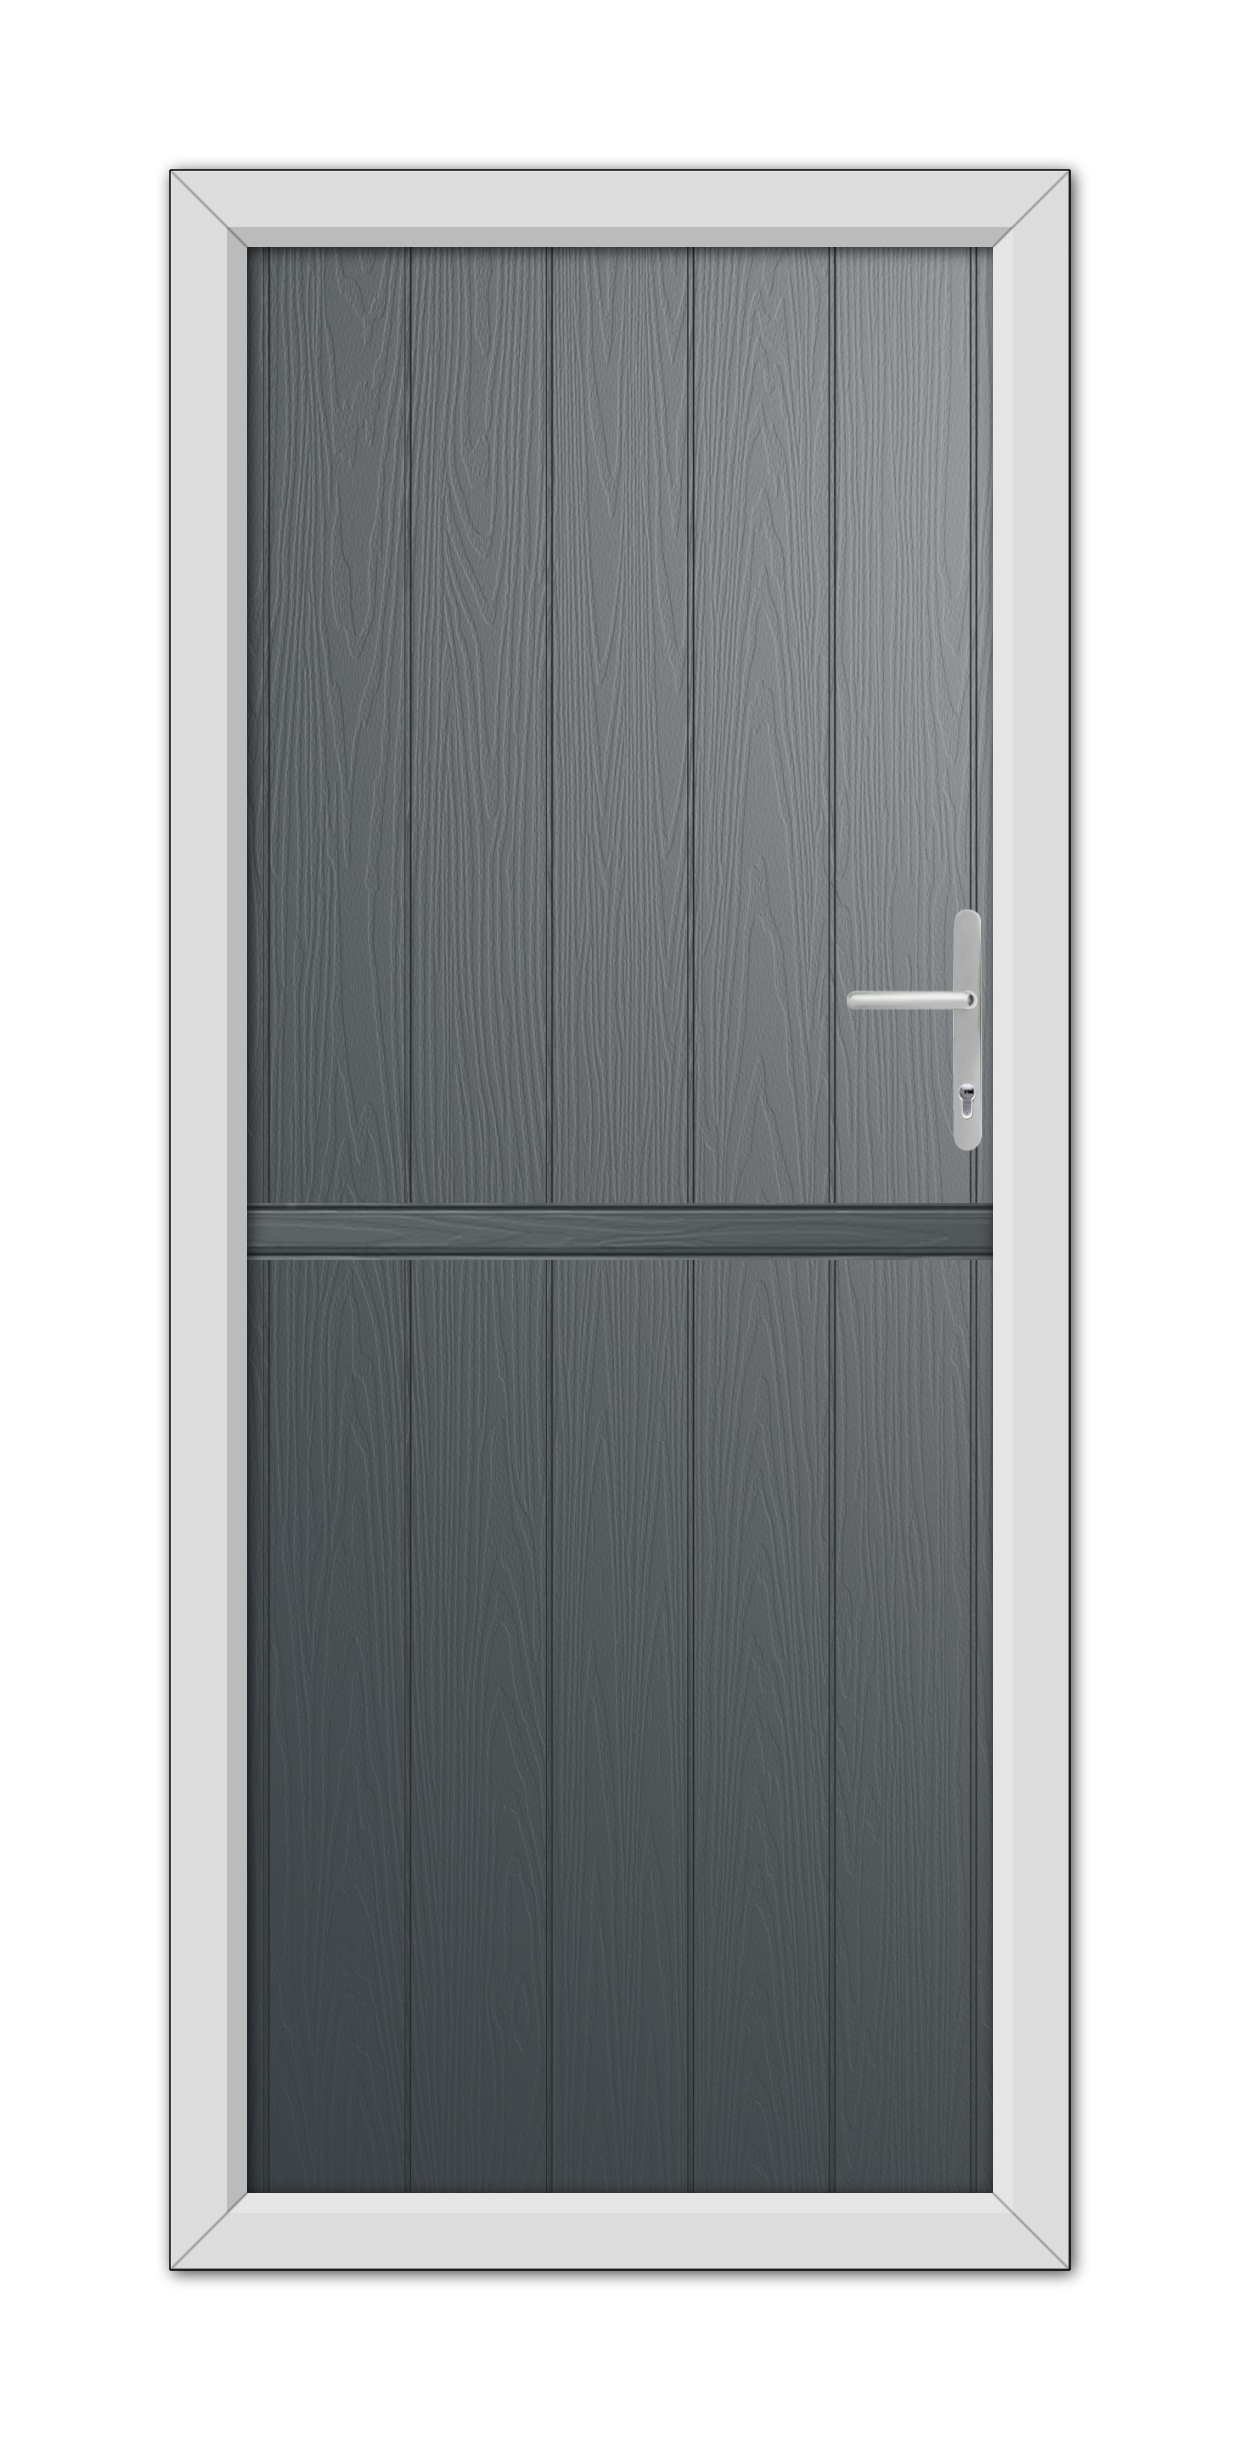 A modern Anthracite Grey Gloucester Stable Composite Door 48mm Timber Core in a white frame with a metallic handle, viewed from the front.